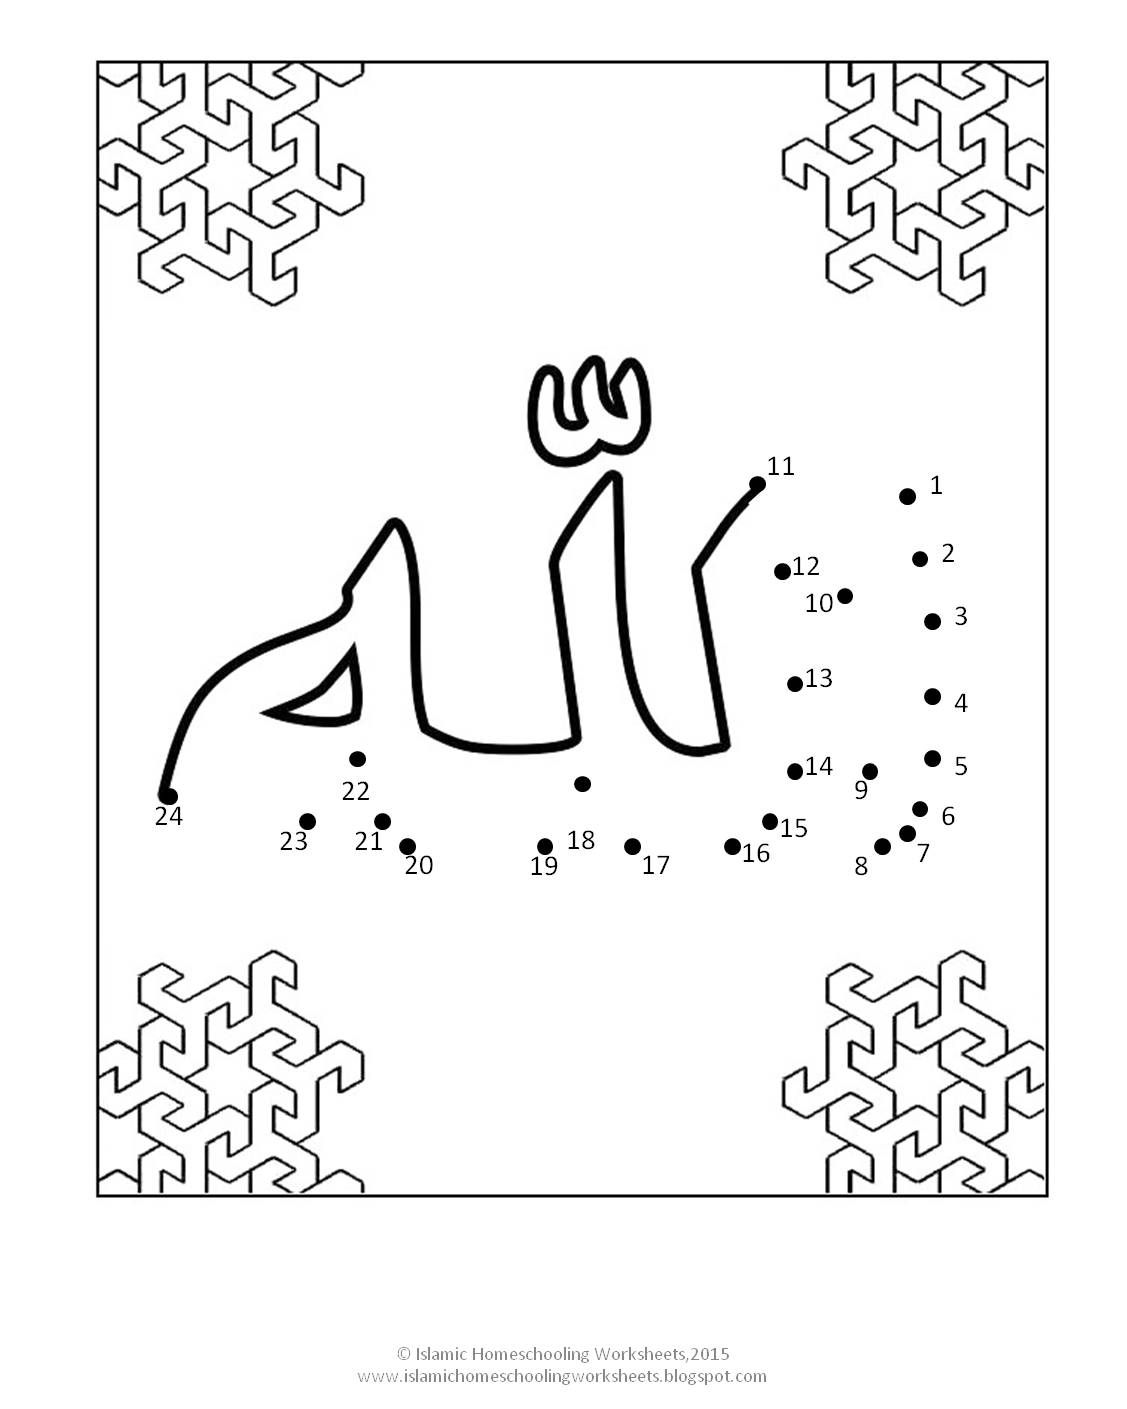 free-islamic-joining-the-dots-connect-the-dots-dot-to-dot